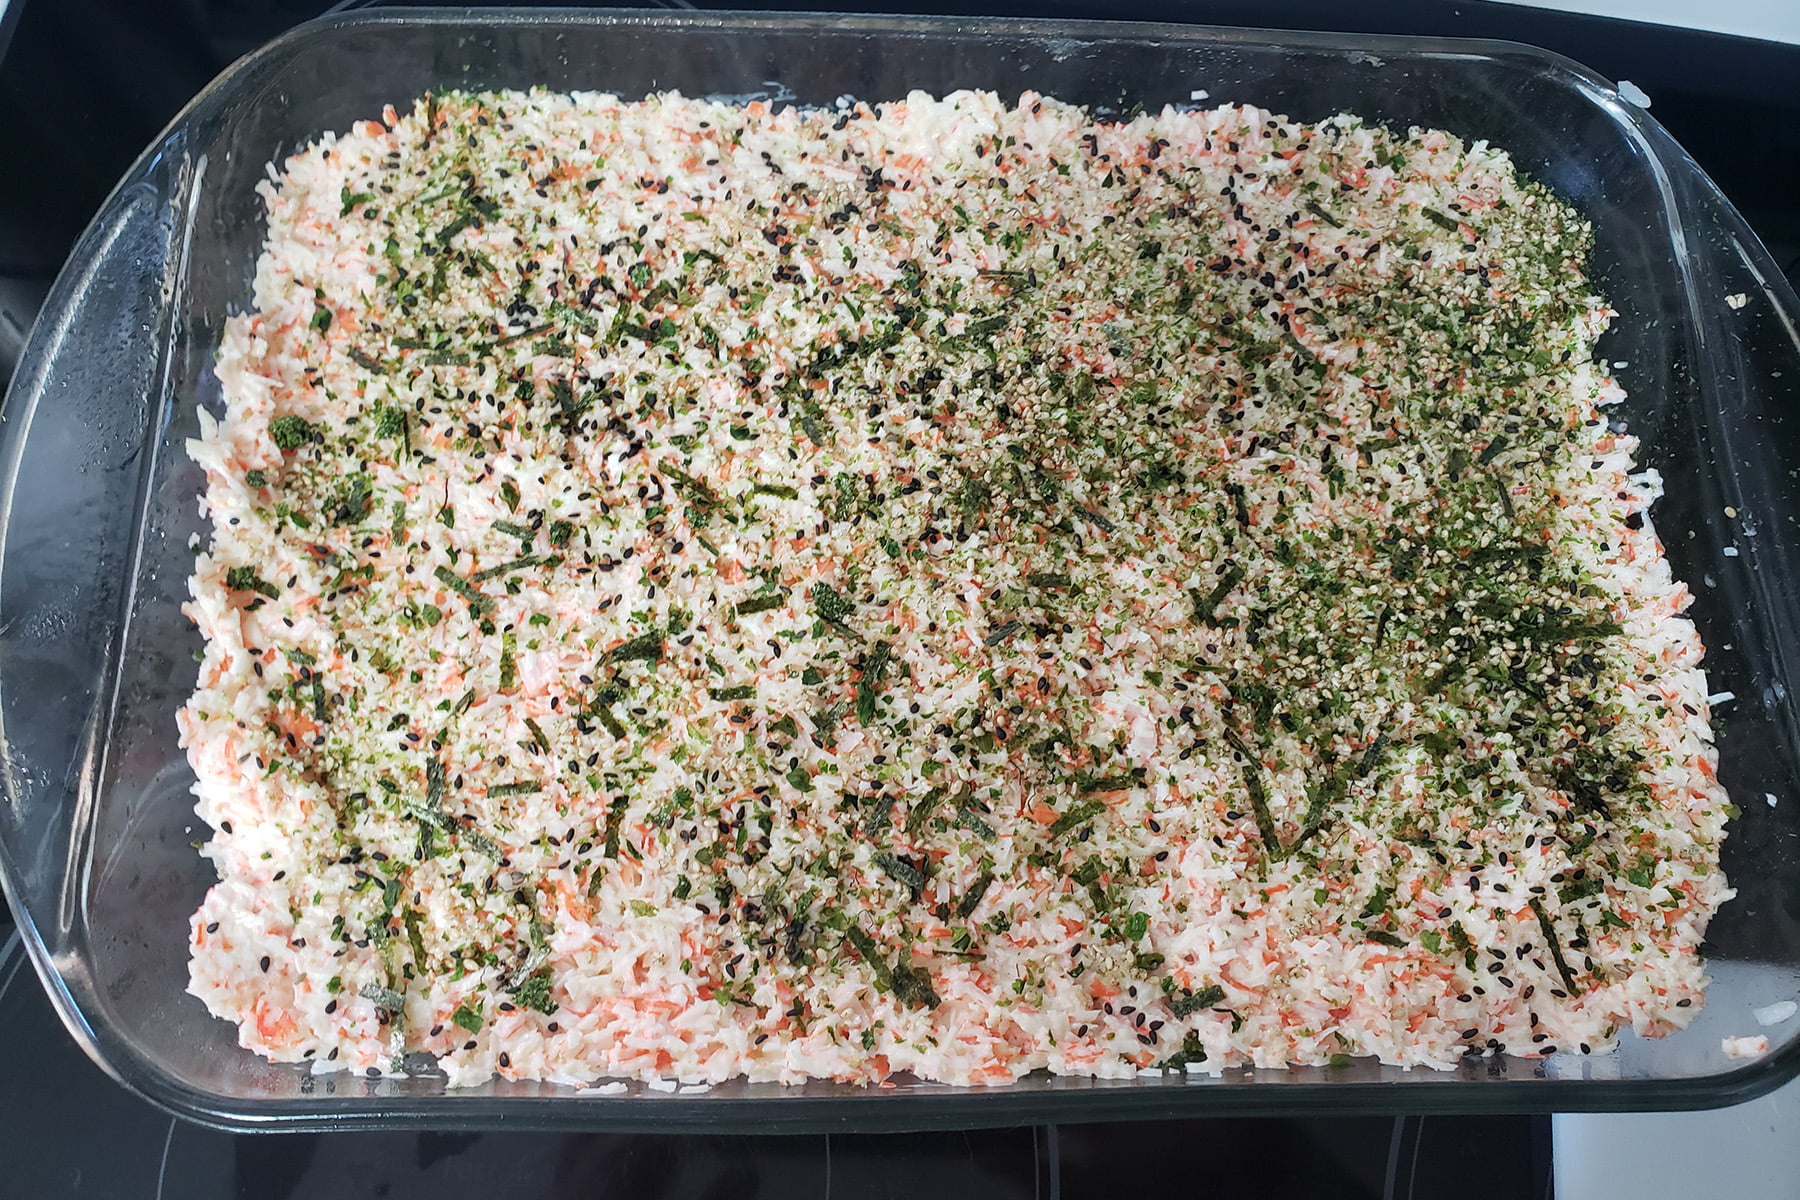 A large glass baking dish is shown with green furikake mix spread over the spicy crab mixture.